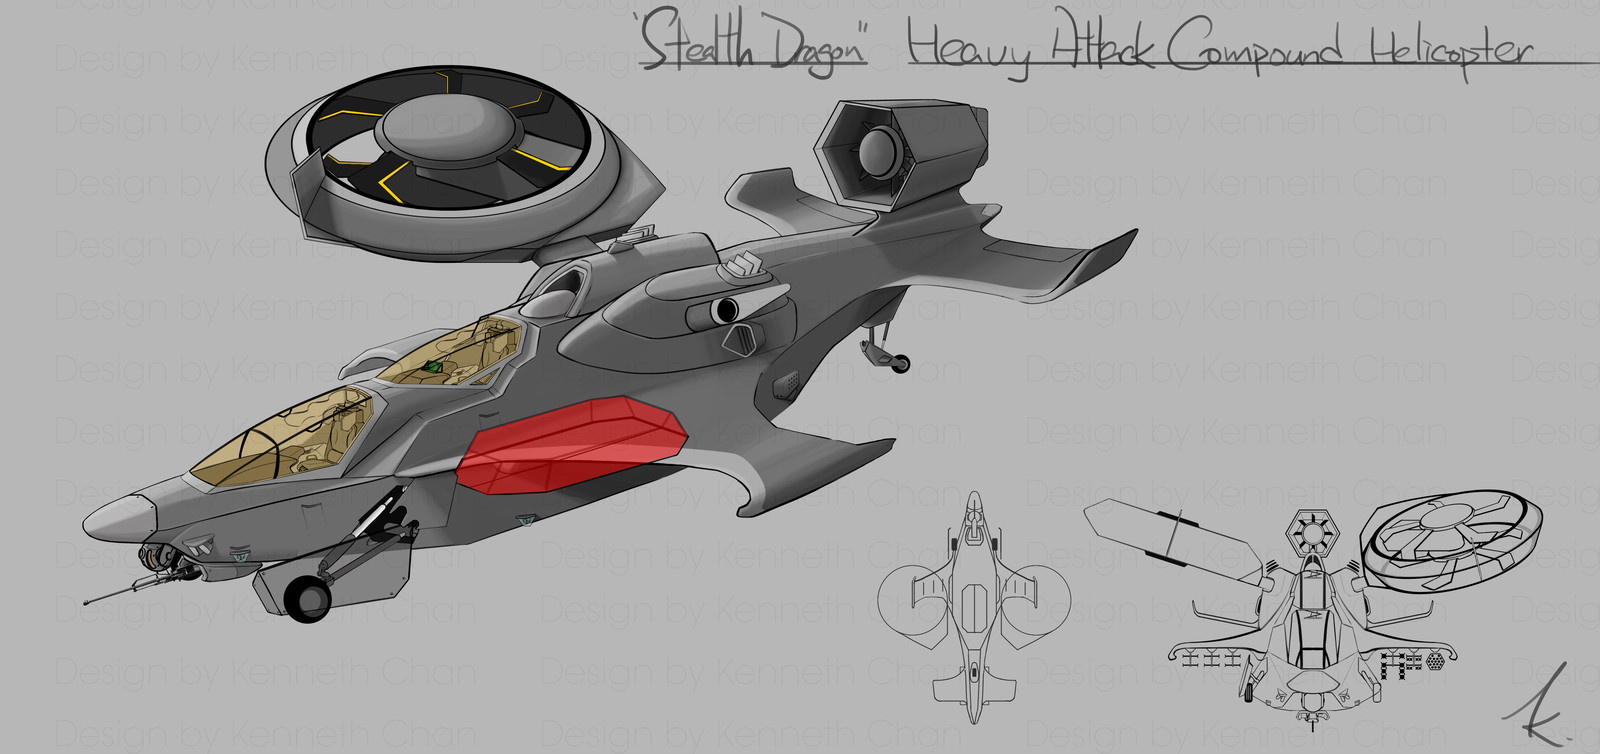 "Stealth Dragon" Heavy Attack Compound Helicopter